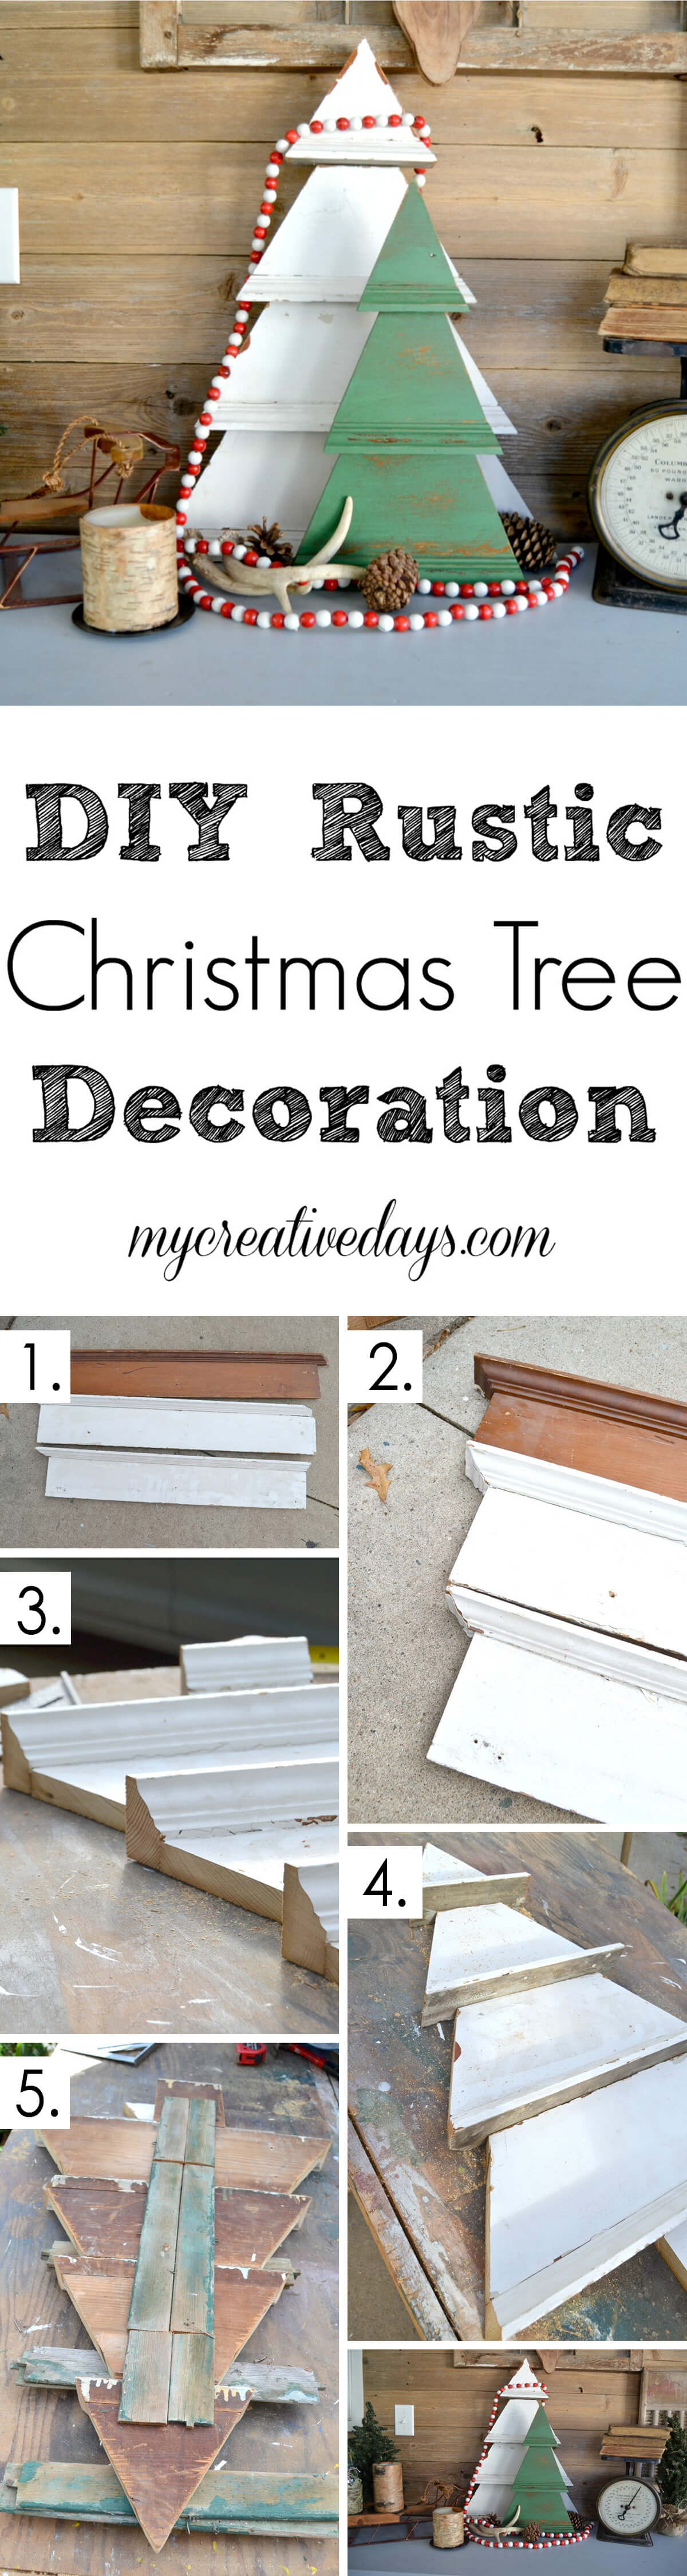 28 Best Rustic DIY Christmas Decor Ideas and Designs for 2018